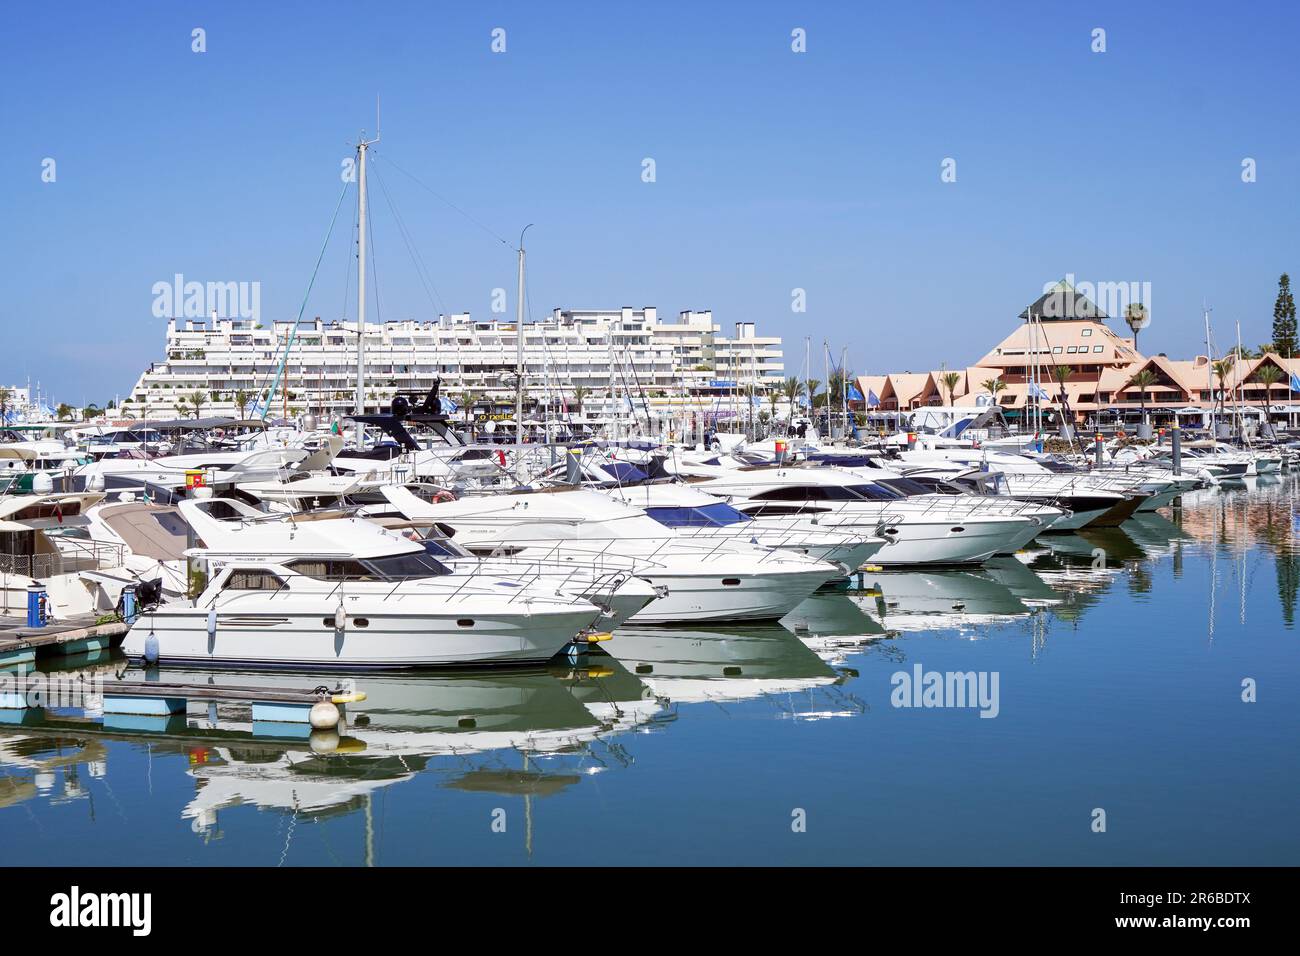 Vilamoura marina and harbour with private boats and yachts, Algarve, Portugal, Europe. Stock Photo